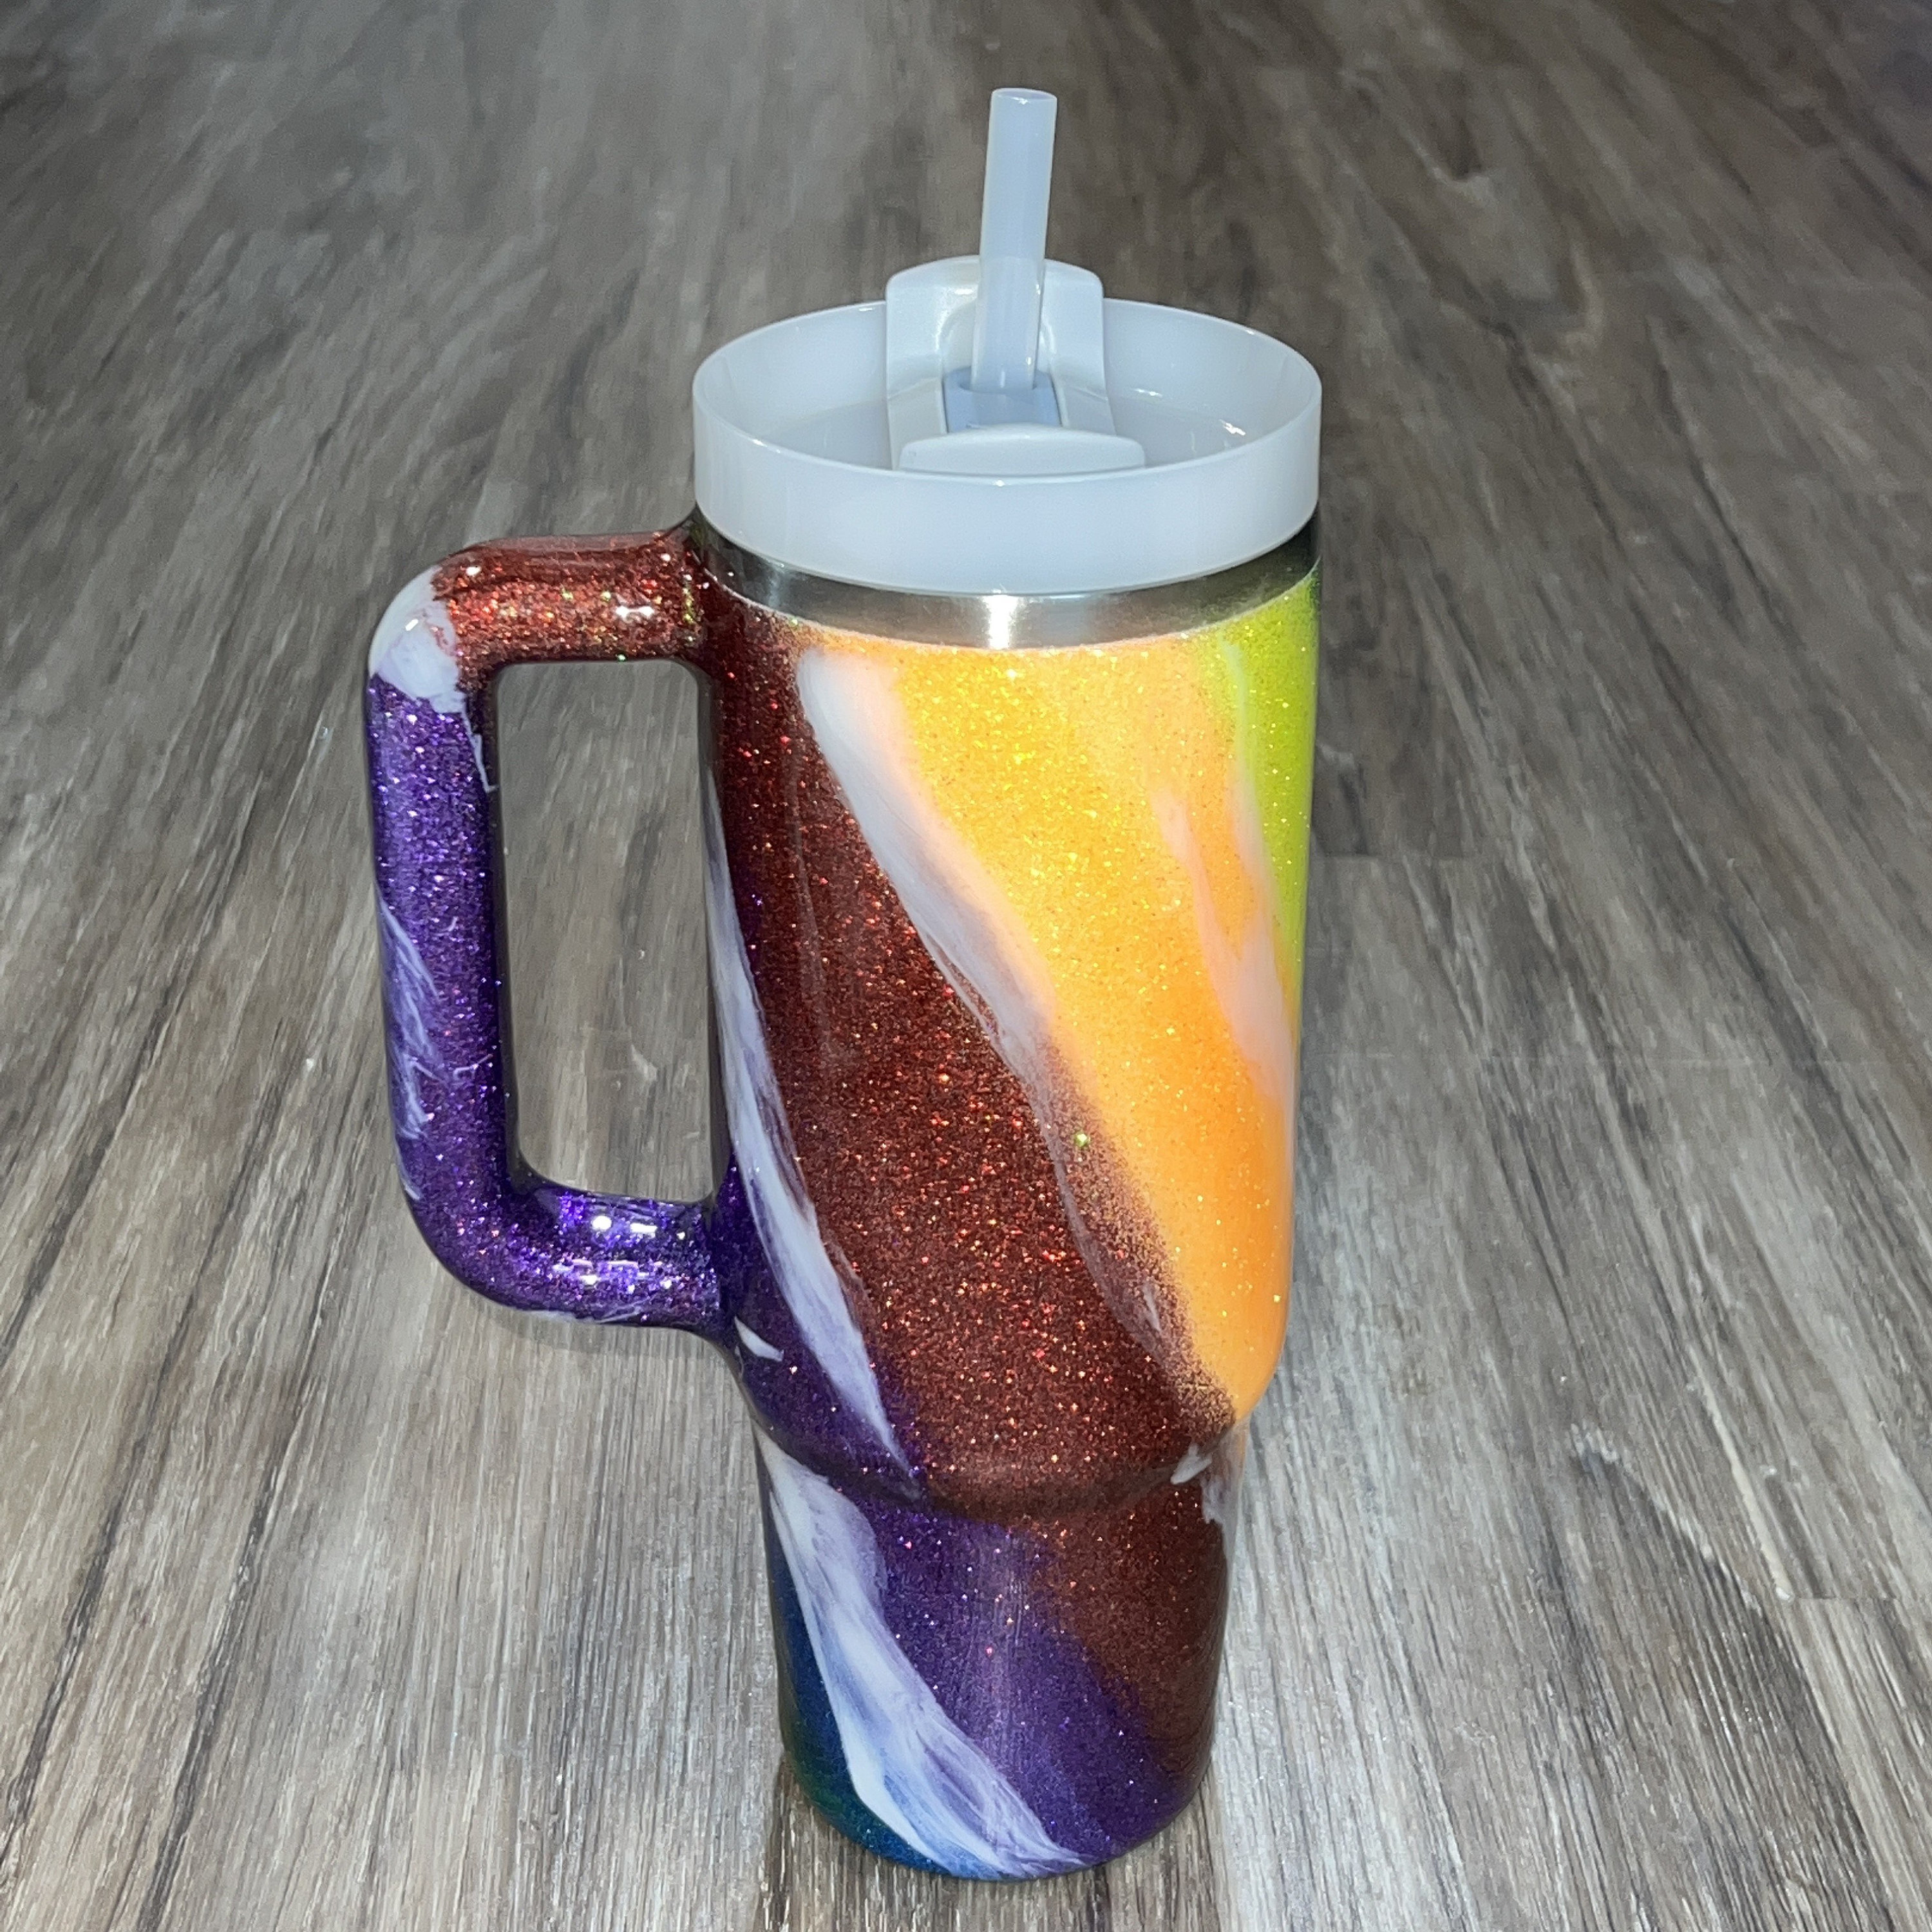 Red, White, and Blue Milky-way Stanley Tumbler MADE TO ORDER 